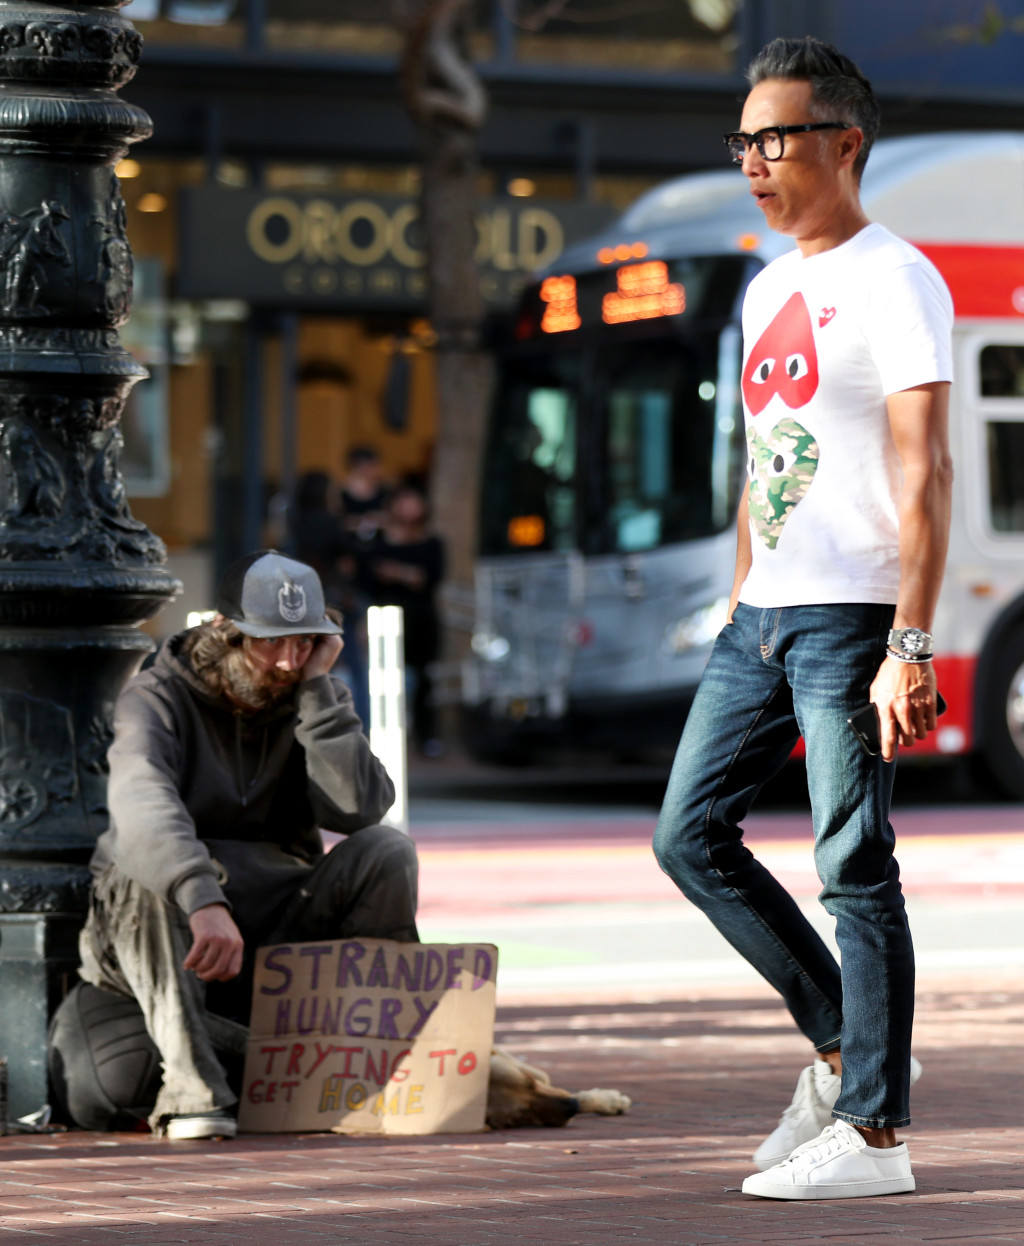 tech workers and homelessness in San Francisco 